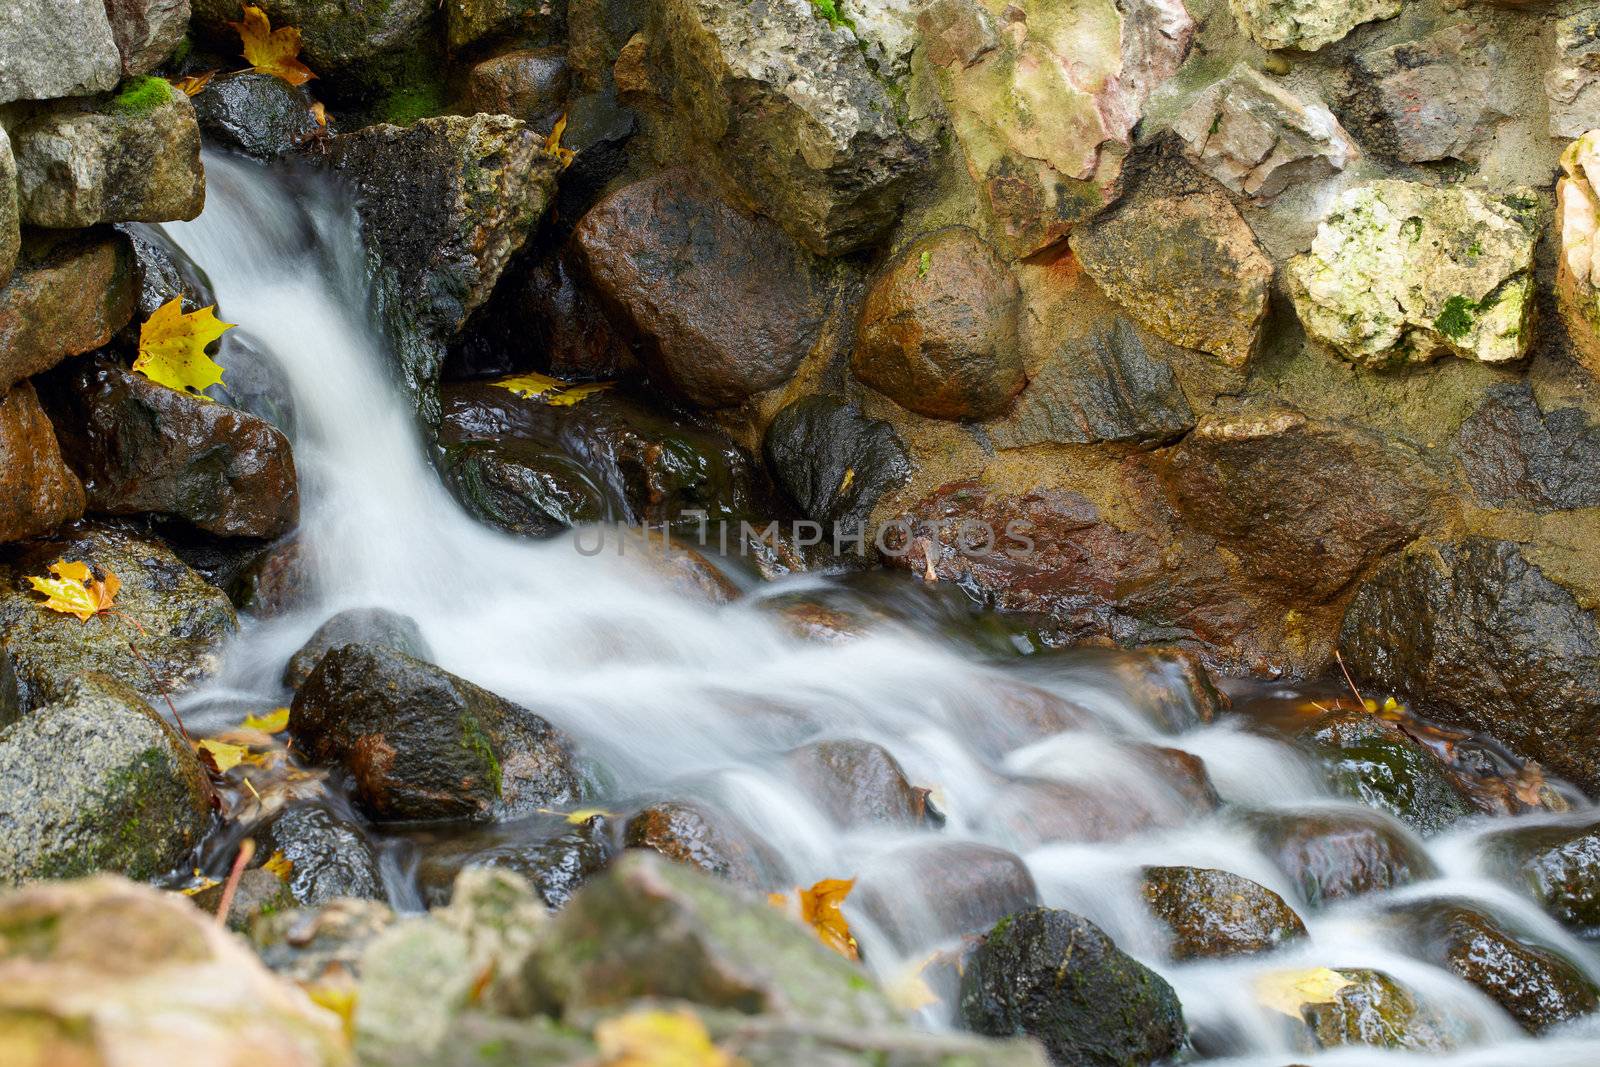 Water shot with long exposure in the park